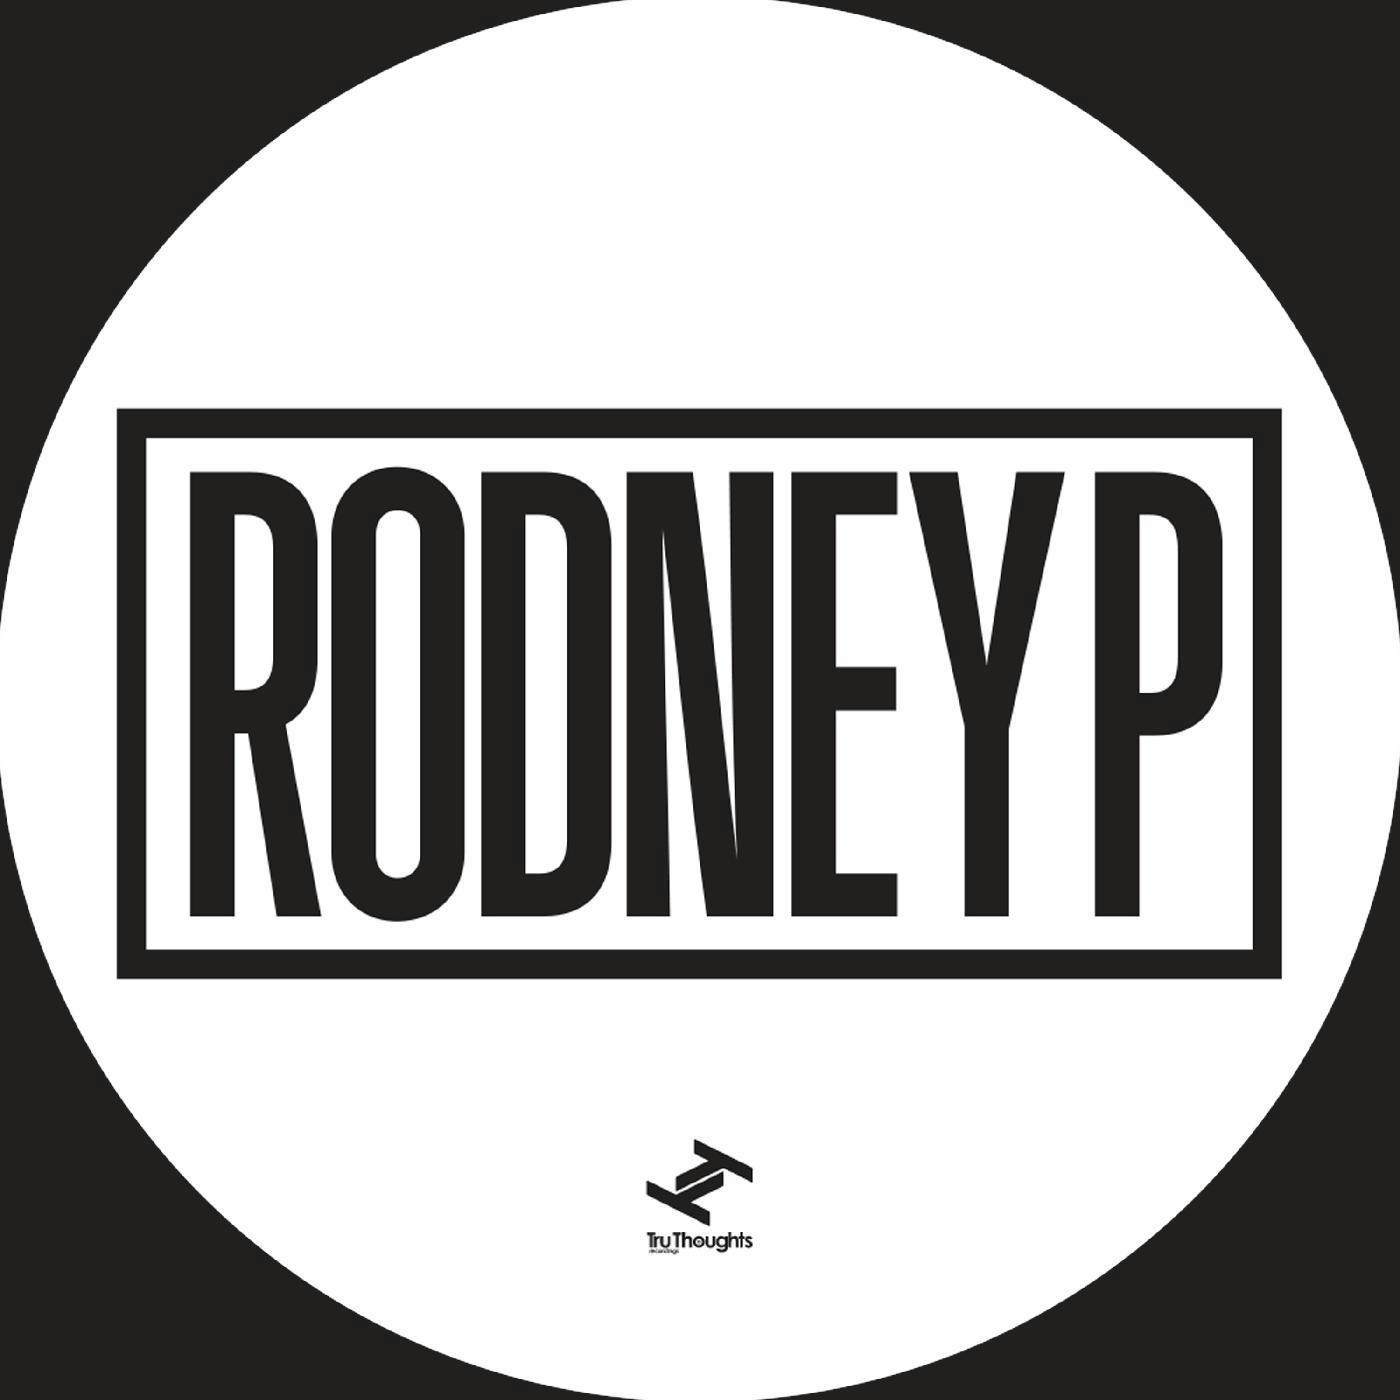 Rodney P The next chapter-recognise me Vinyl Record